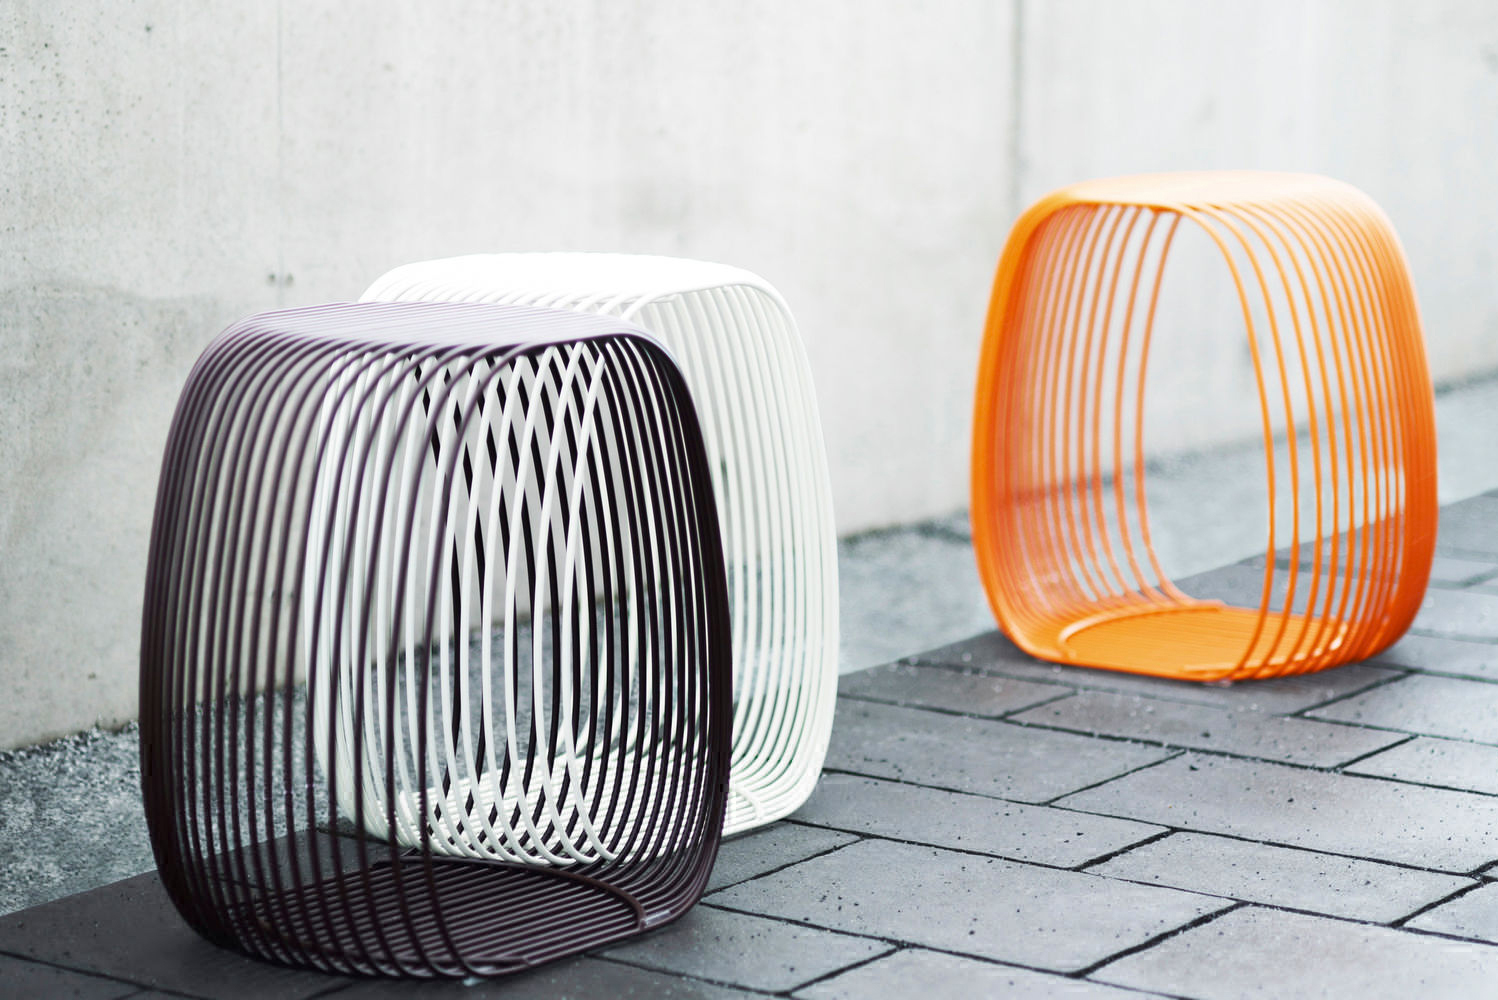 Introducing the Dexter stool by designer Andreas Farkas for Lammhults 